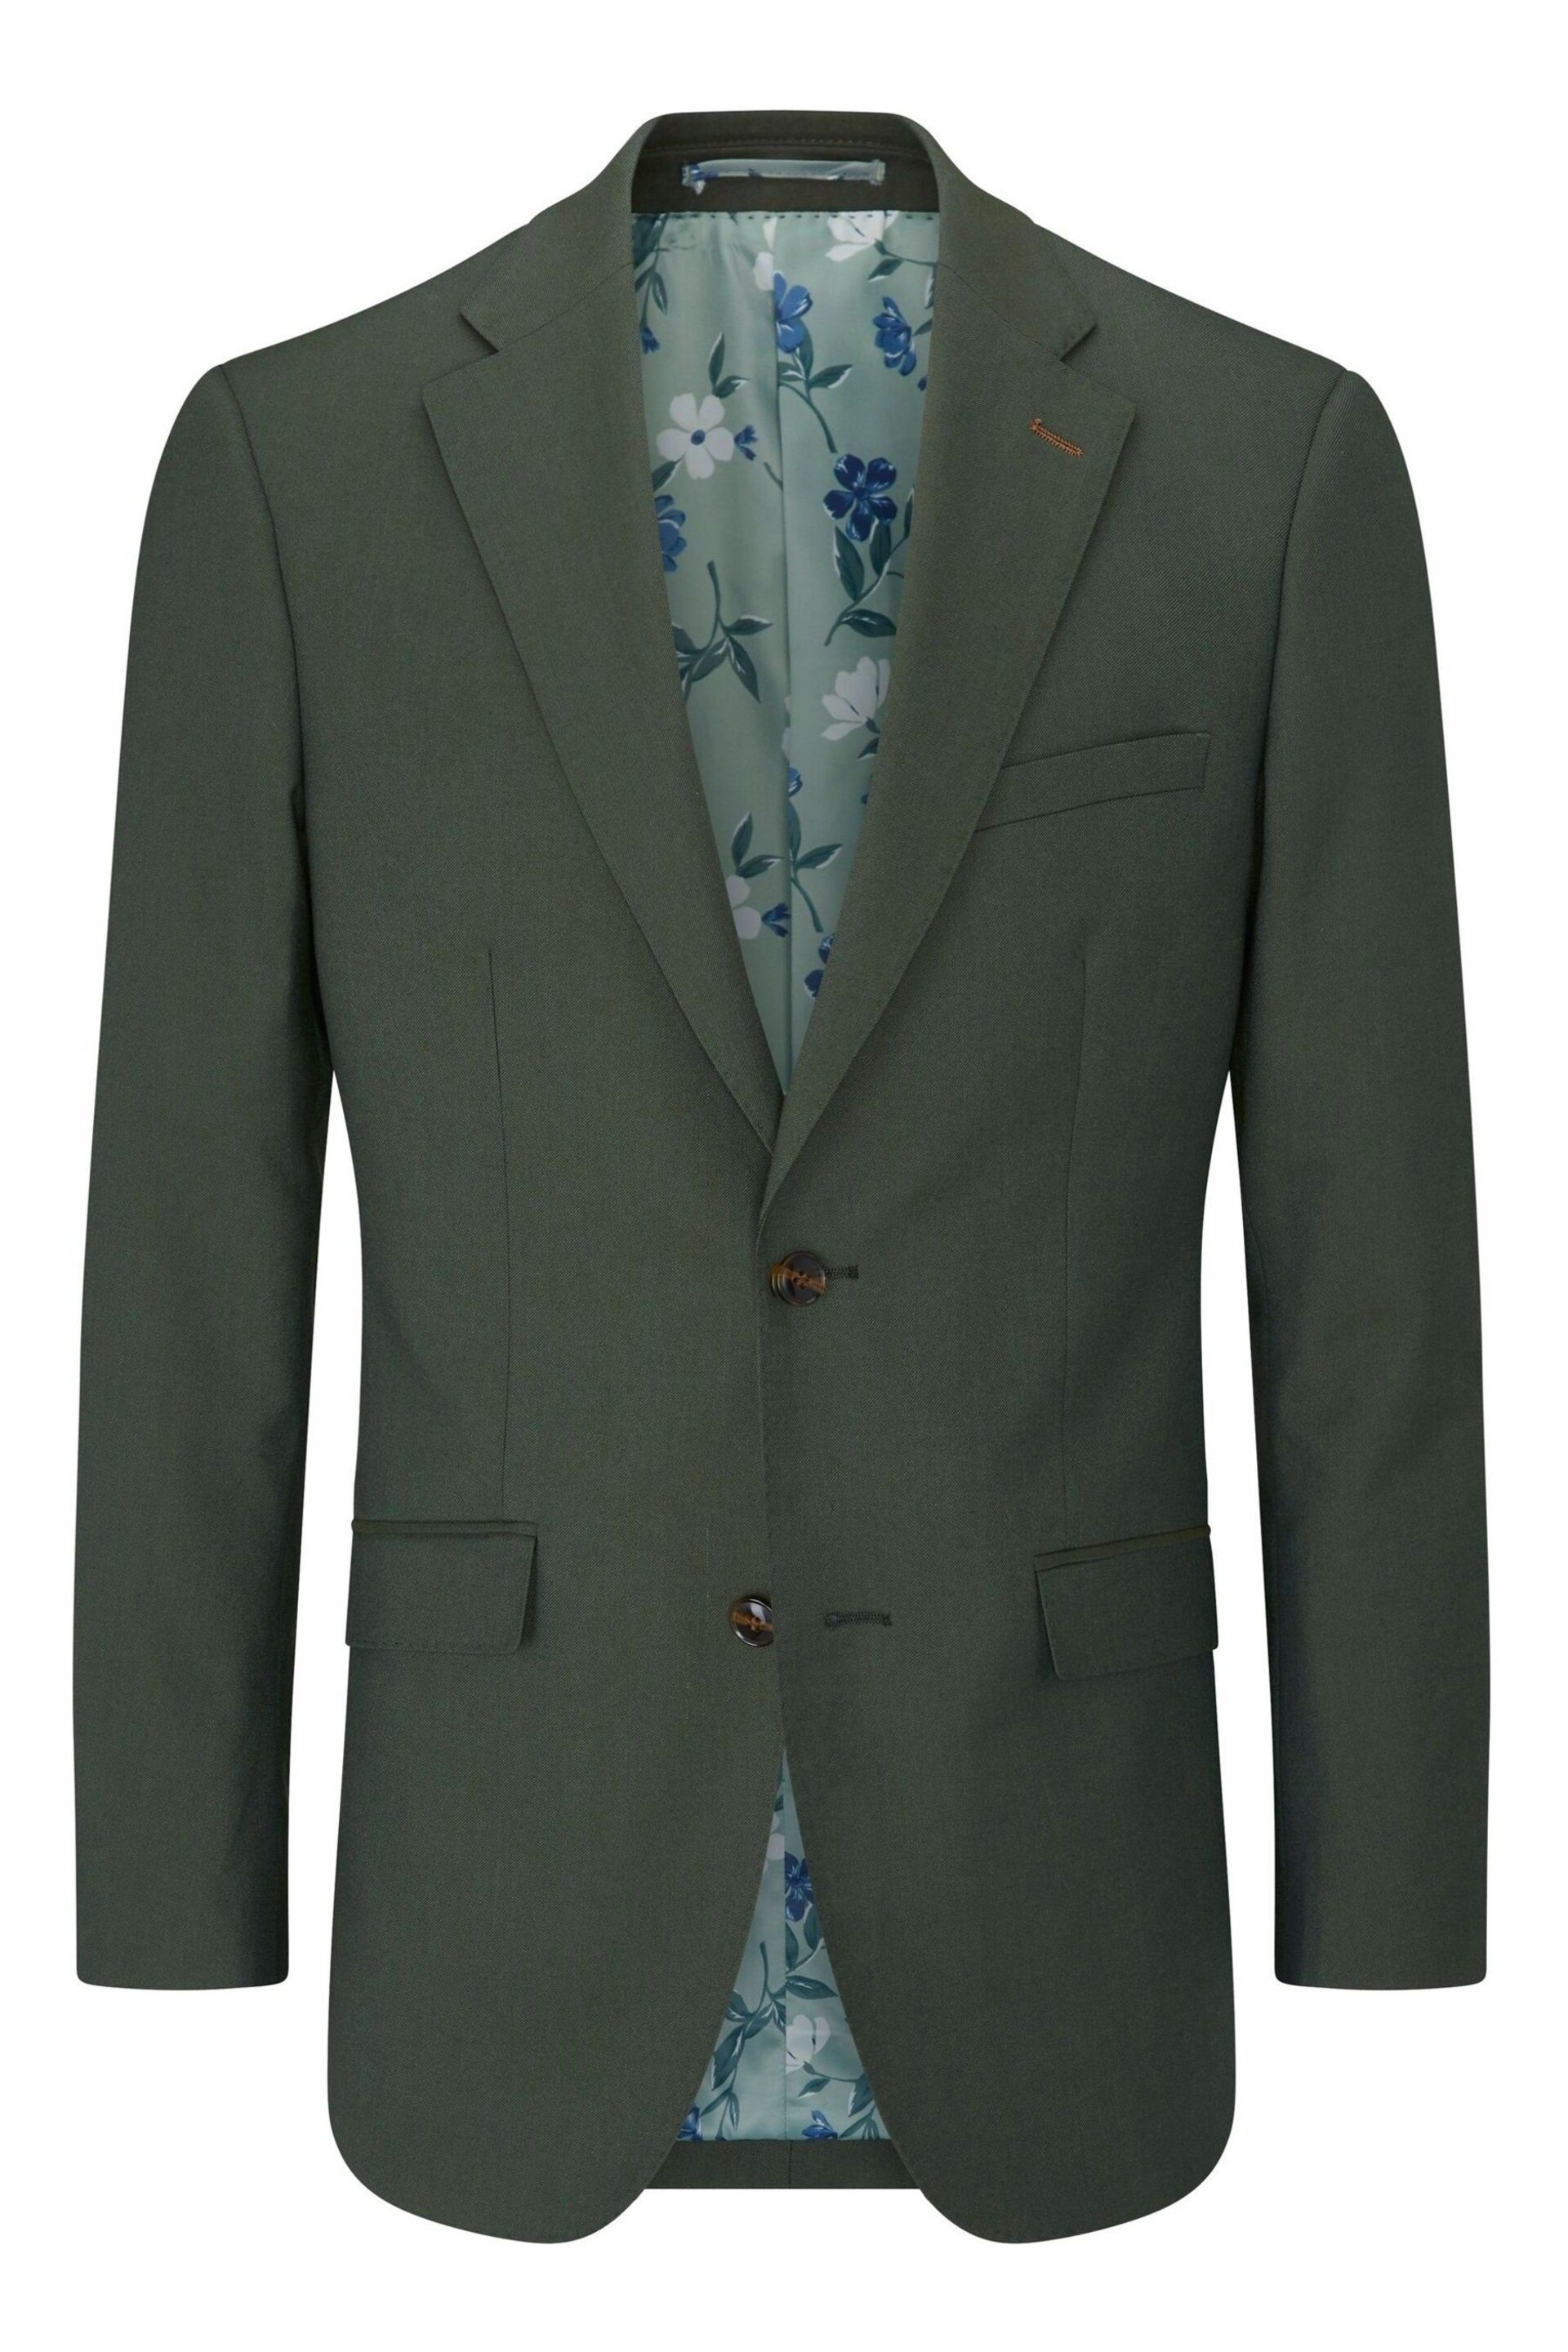 Skopes Harvey Green Tailored Fit Suit Jacket - Image 5 of 6